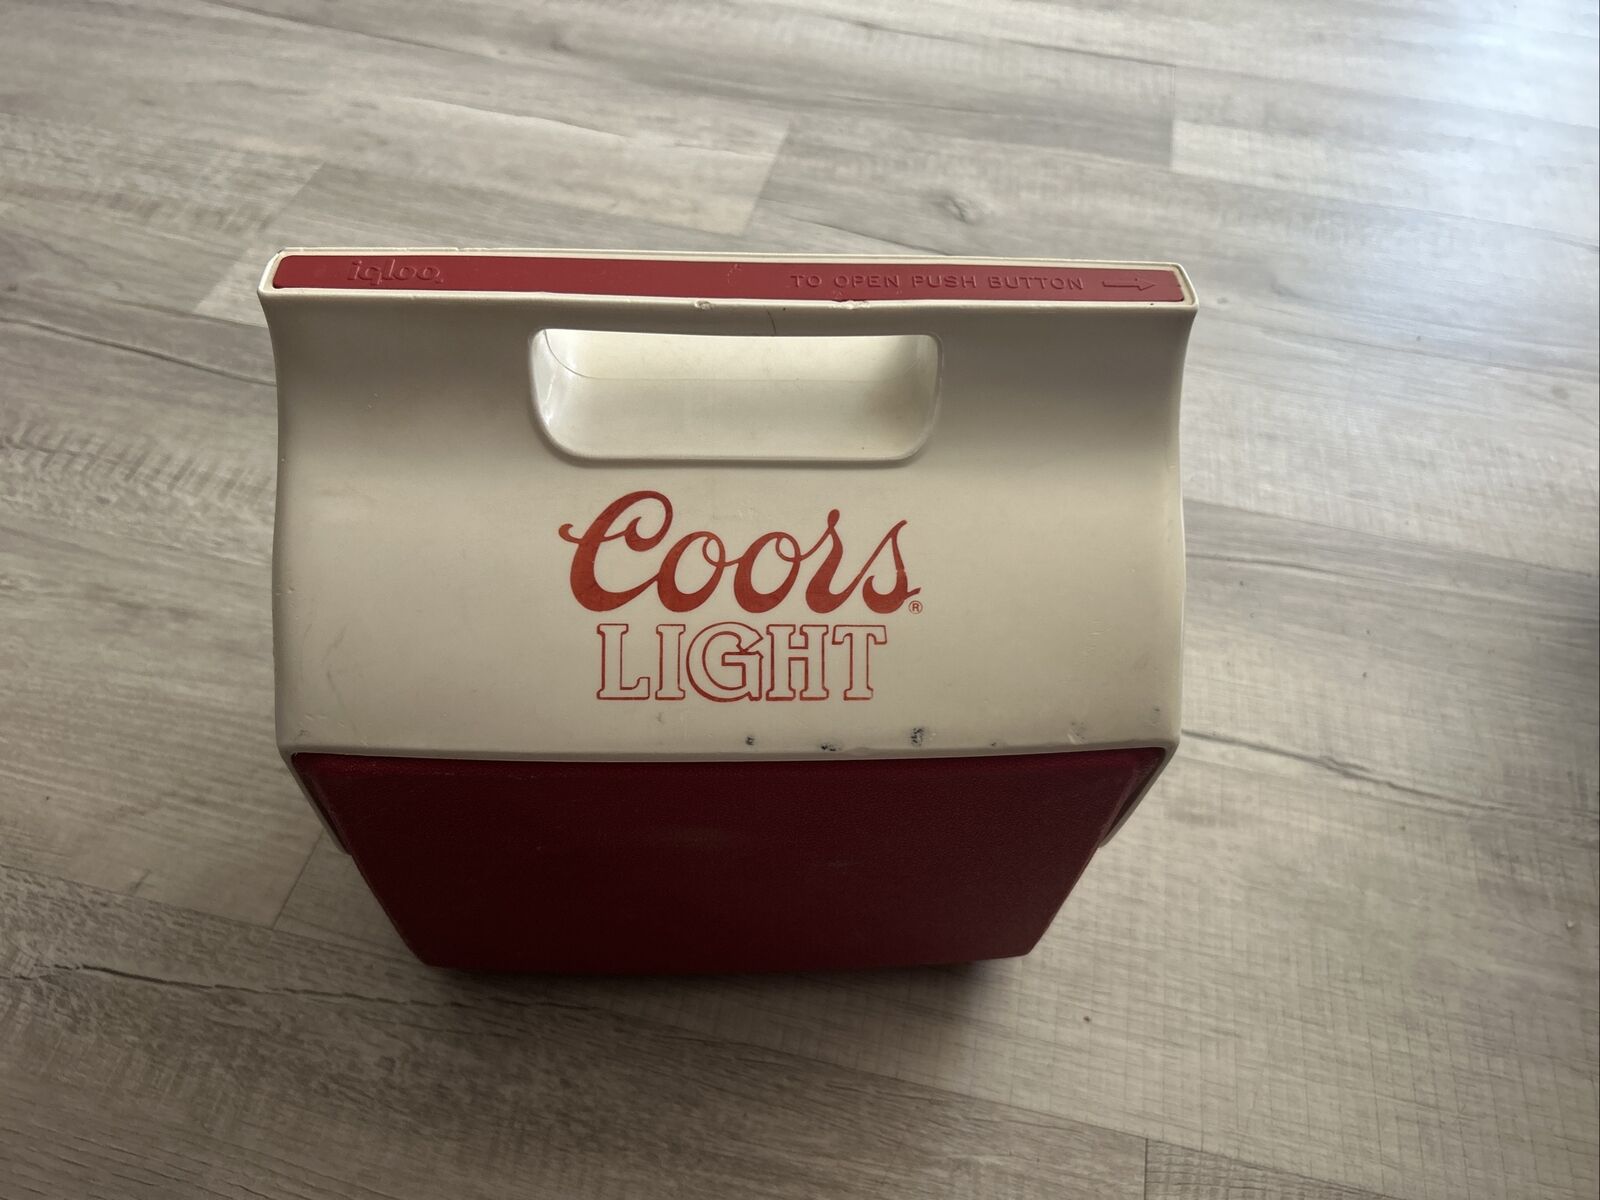 Vintage Coors Light Beer Cooler Igloo Red White 1980s